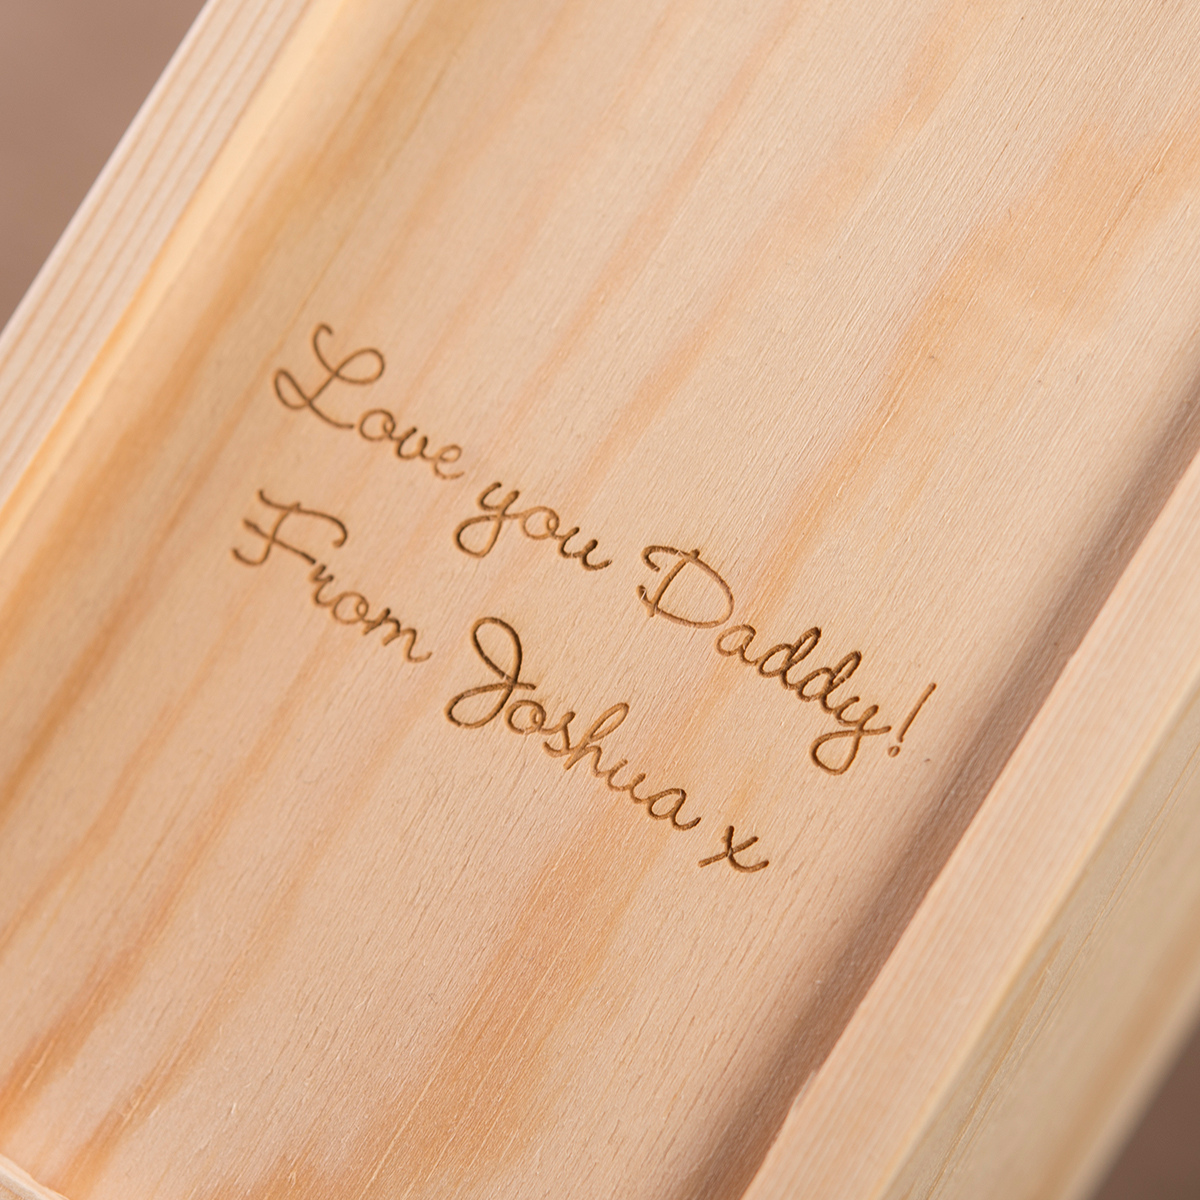 Personalised Wooden Wine Box - Happy 1st Father's Day